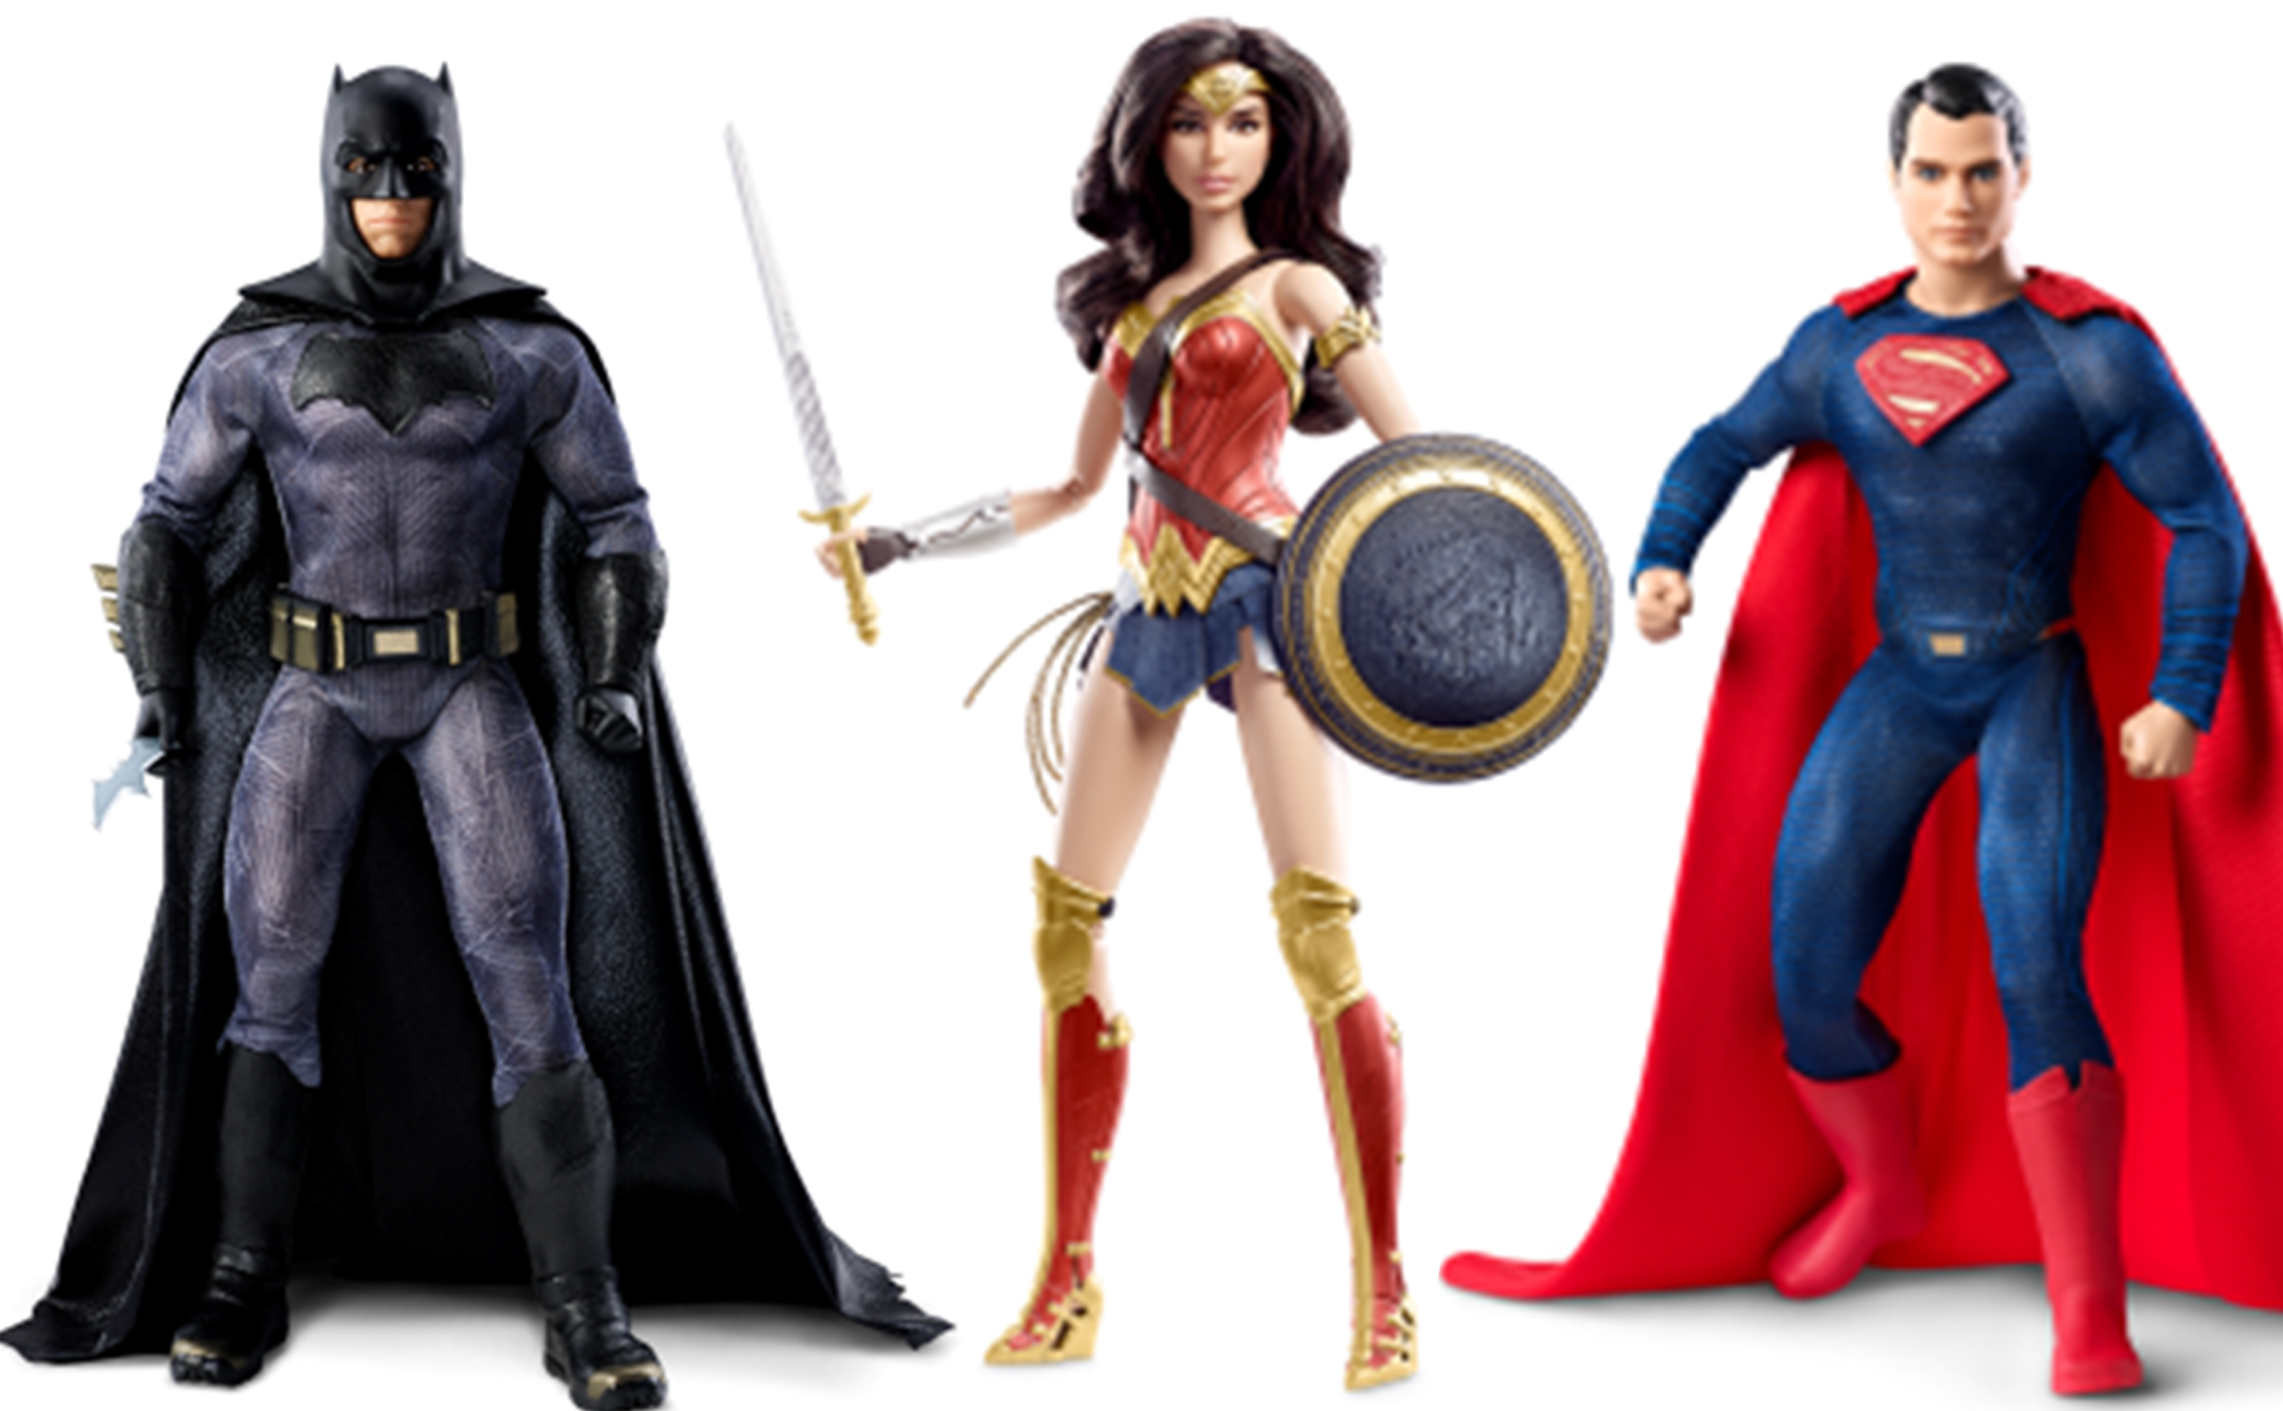 Barbie line Batman, Wonder Woman, and Superman: Each fully articulate character based off the movie actors are highly detailed and posable. SRP $39.95